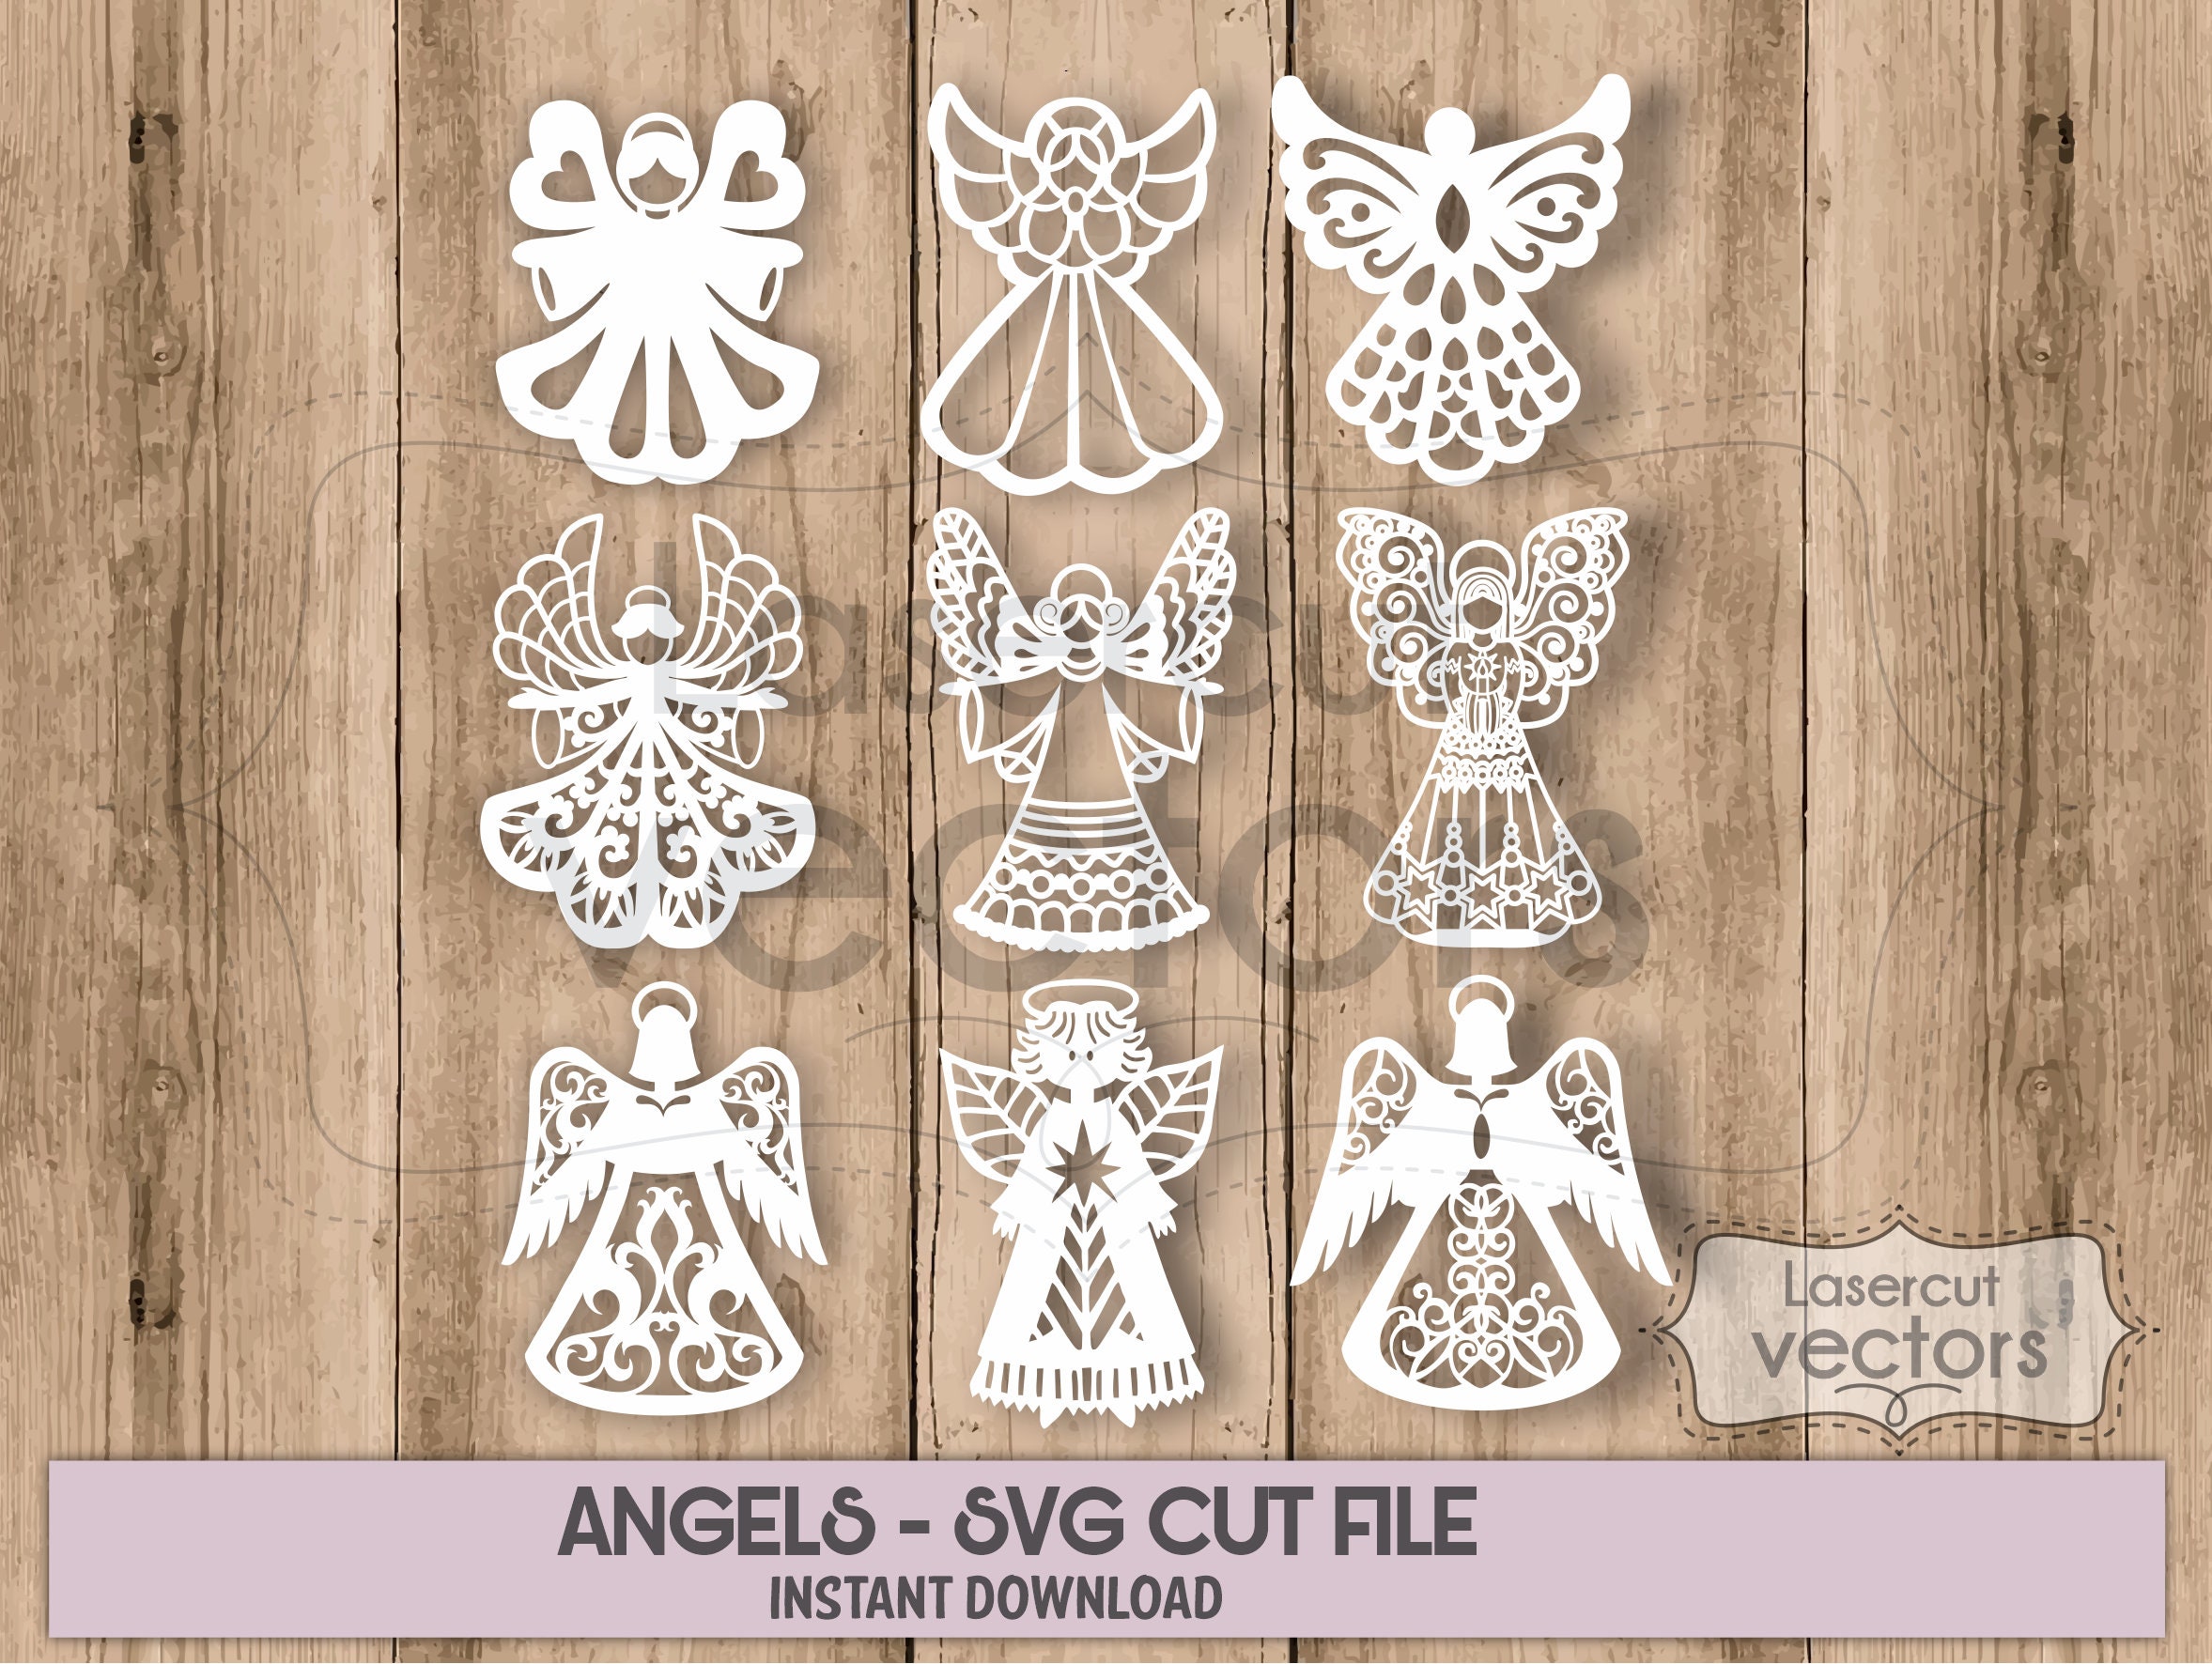 Rhinestone Old English Font Letters Alphabet Font Angel Silhouette Cricut  Svg Cut Template Download Cutting Digital File SS10 Font 